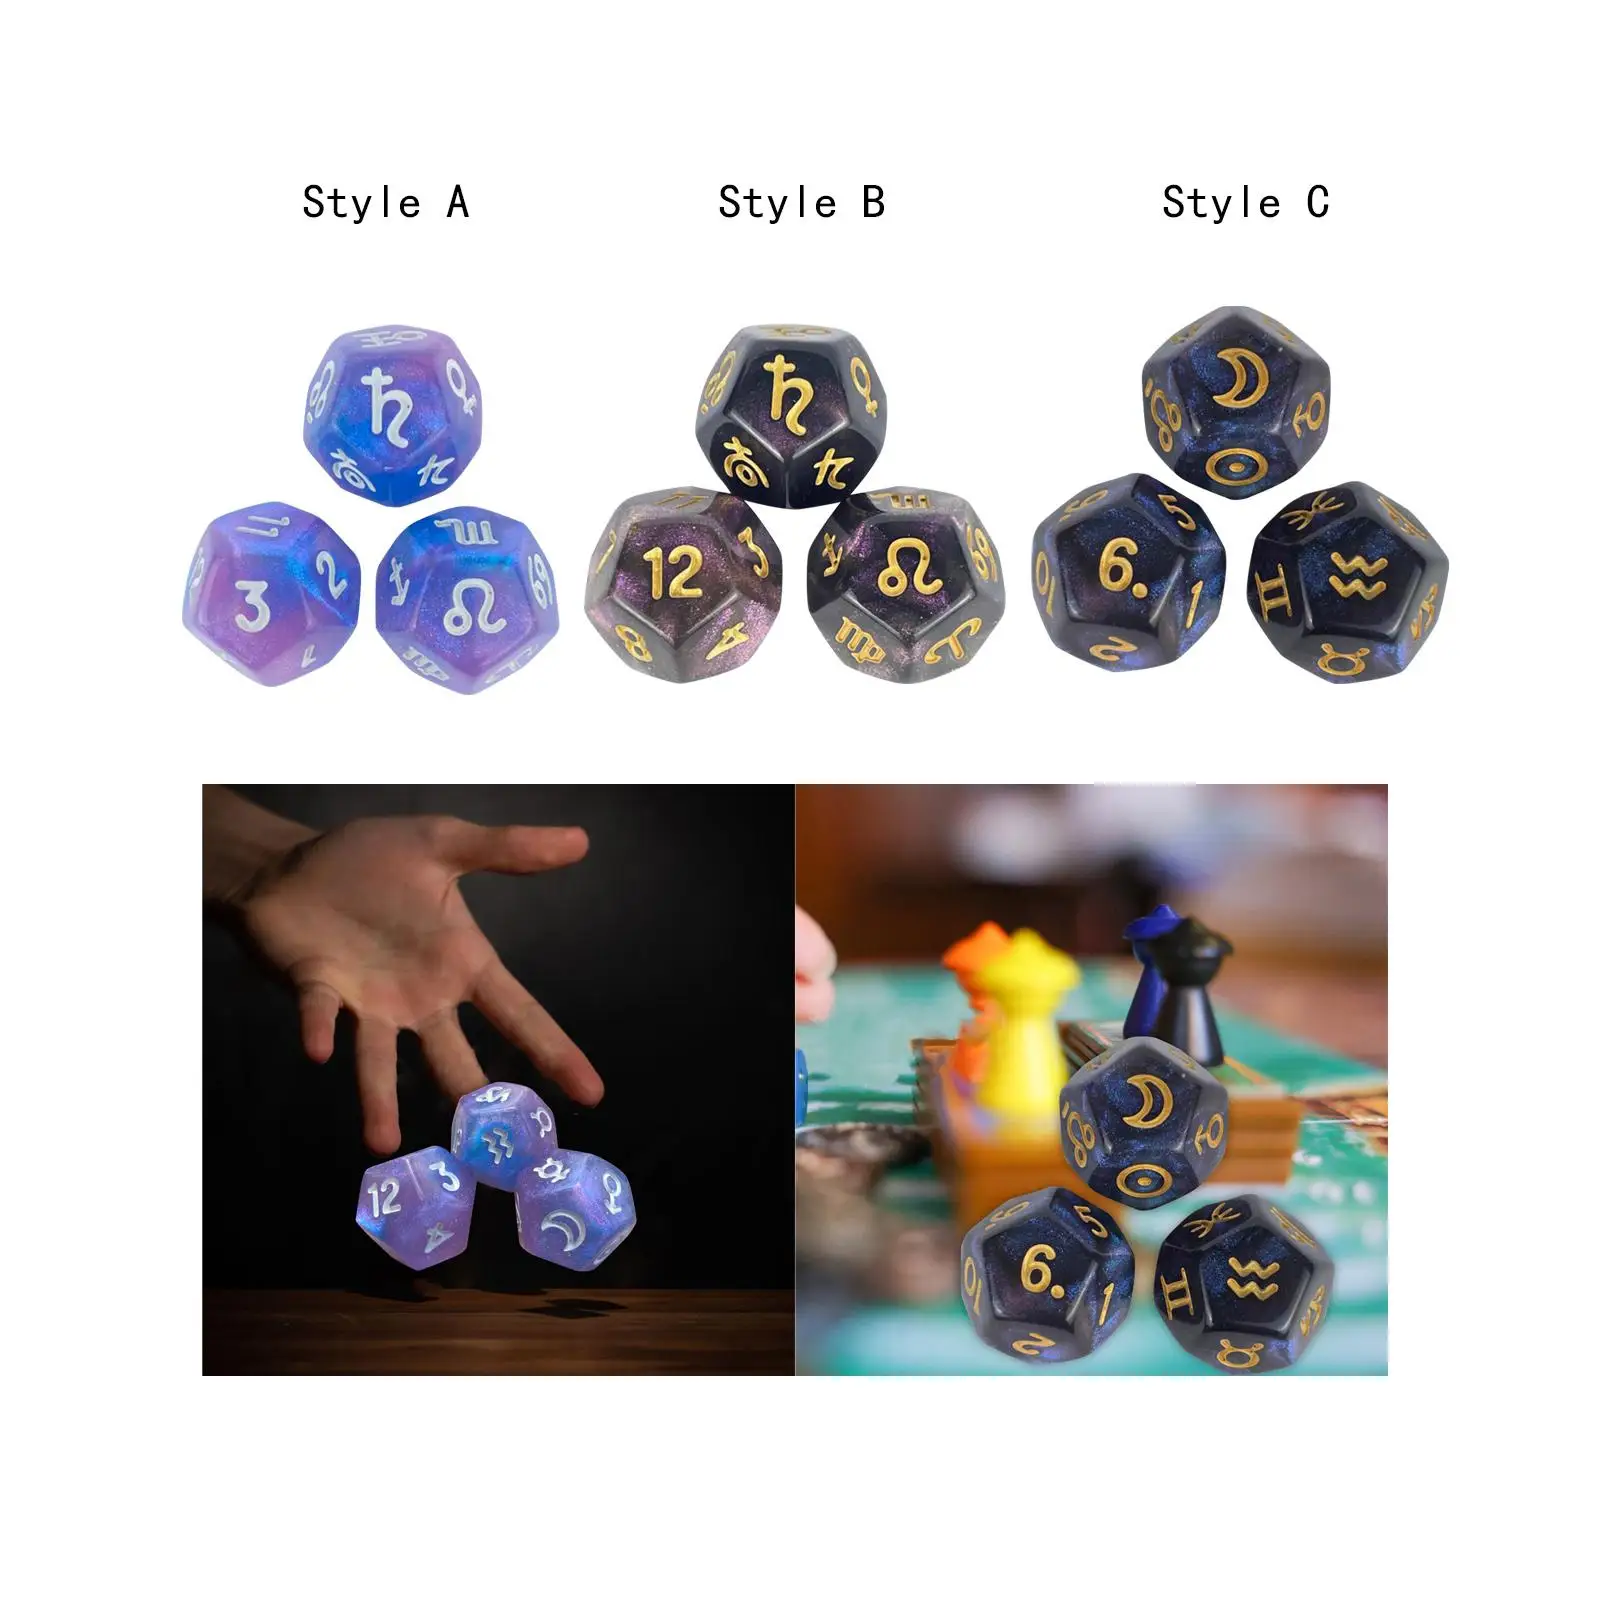 3 Pieces Constellation Dice Board Games Collectibles Acrylic Astrology Signs Dice for Party Astro Divination Gaming Accessory